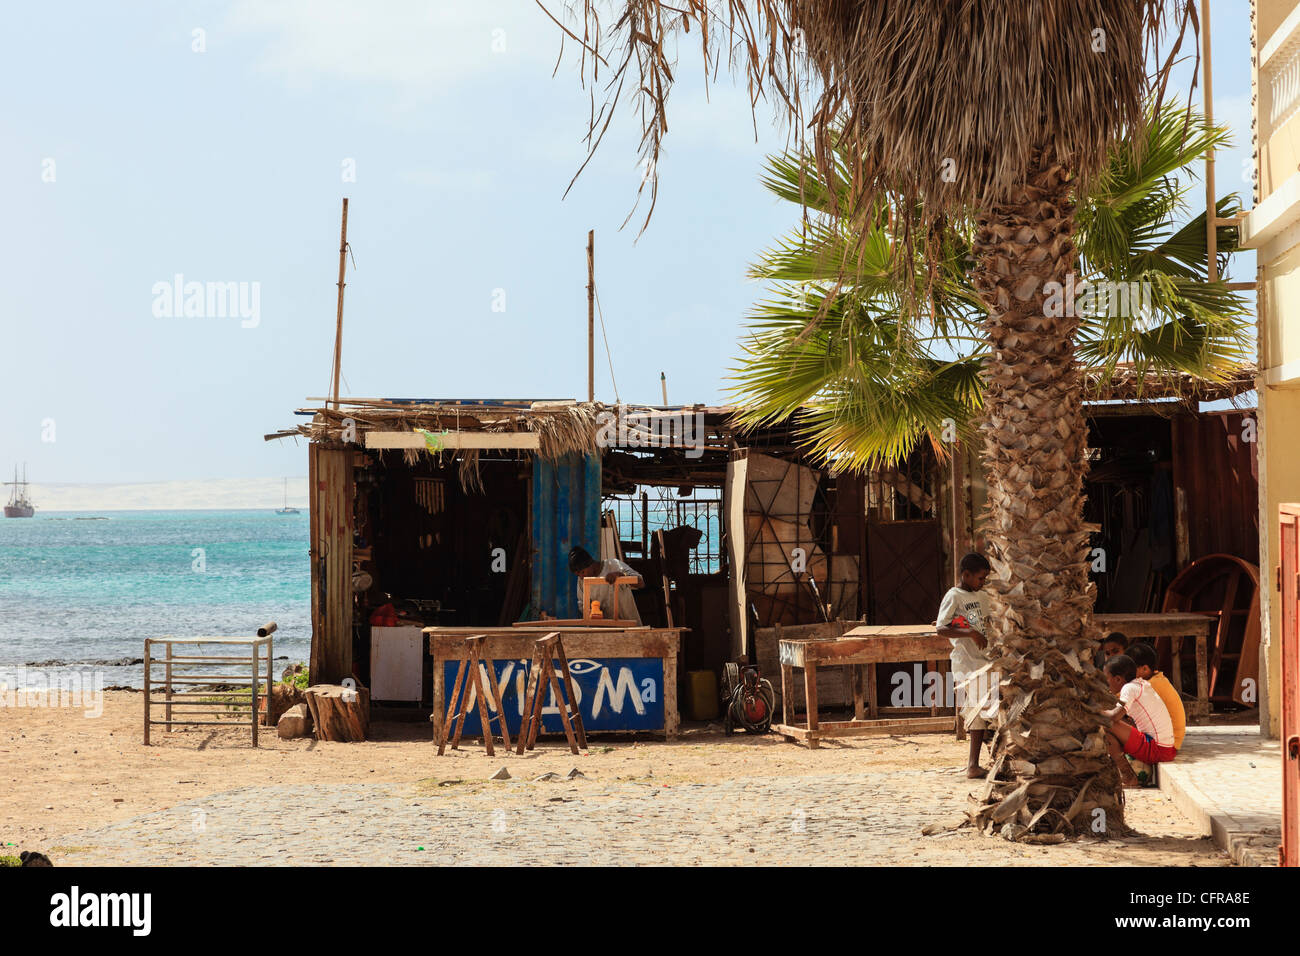 Sal Rei, Boa Vista, Cape Verde Islands, Africa. Furniture workshop in a wooden shack below a palm tree on the city waterfront Stock Photo